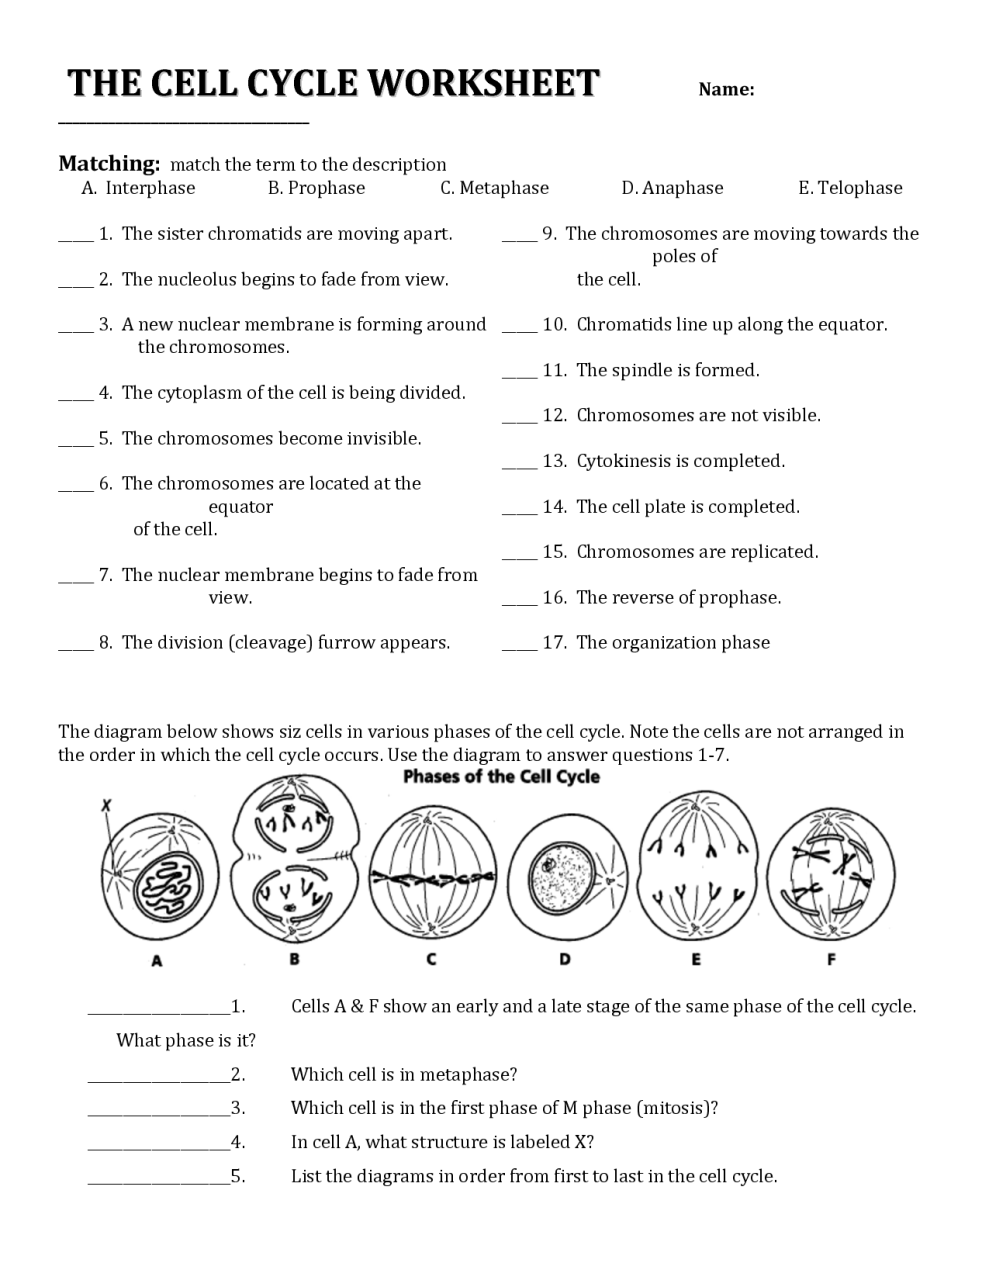 Synonyms Worksheet 2nd Grade